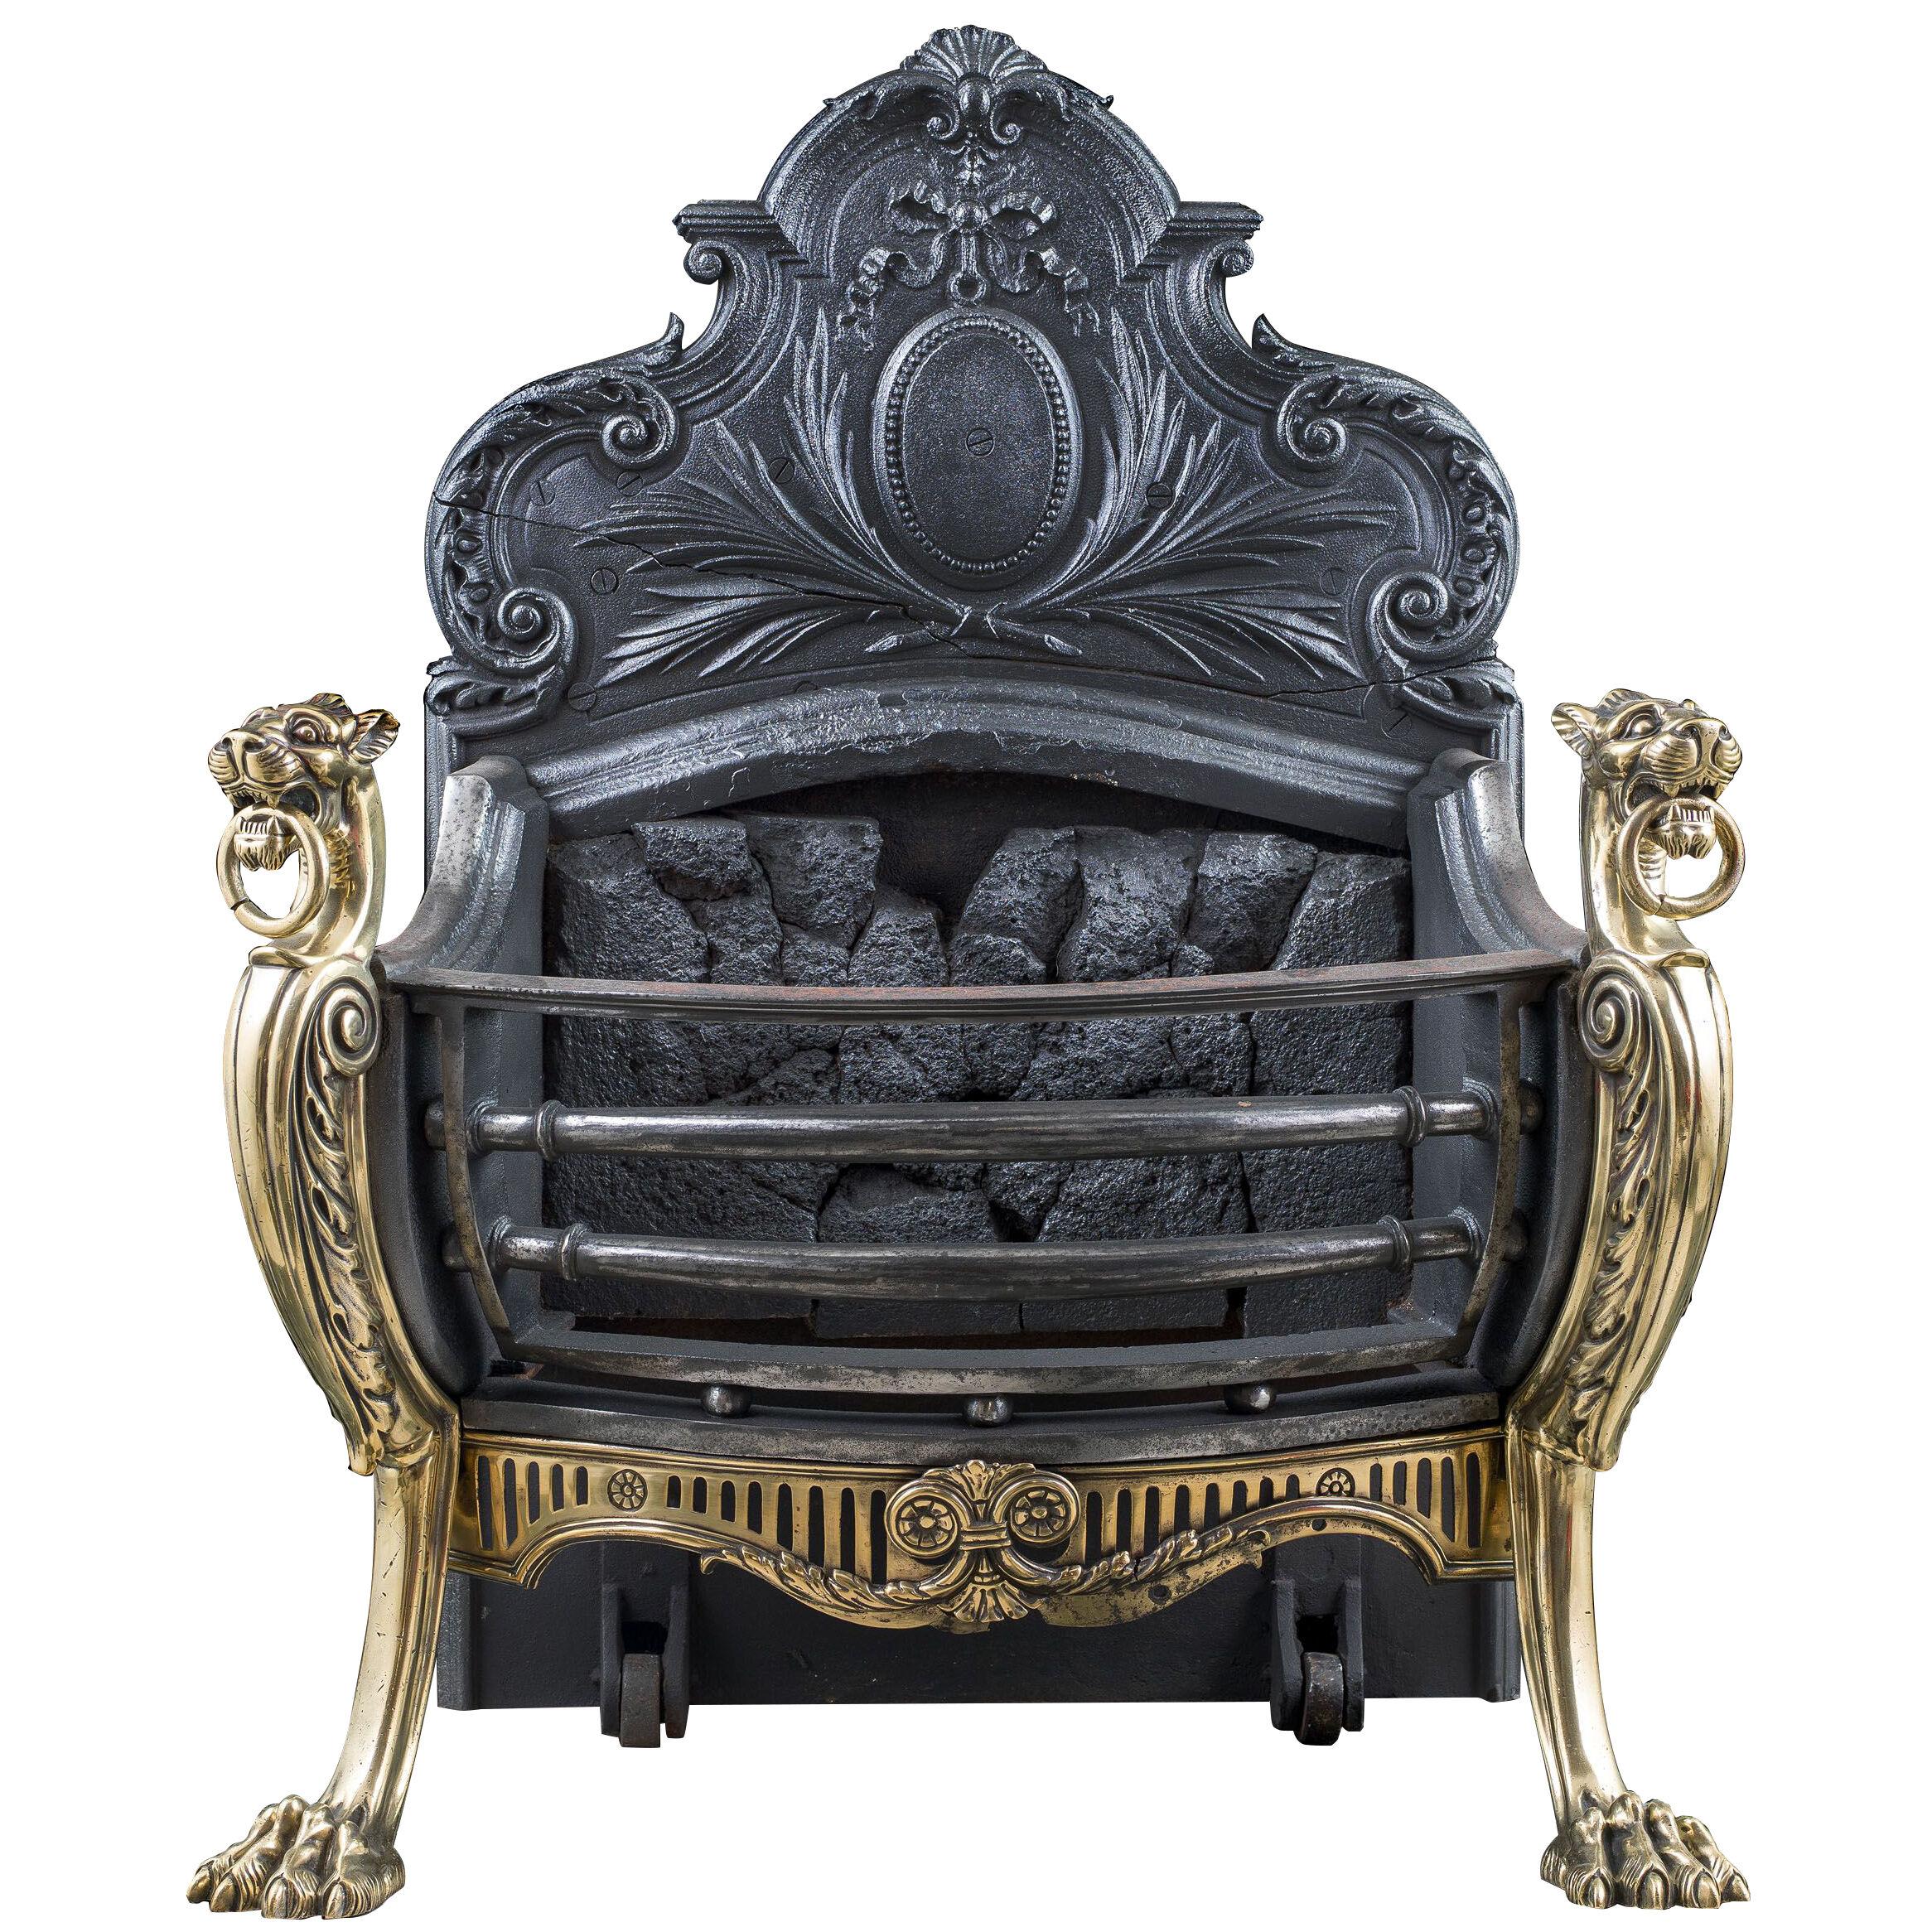 A Rococo style antique griffin fire basket